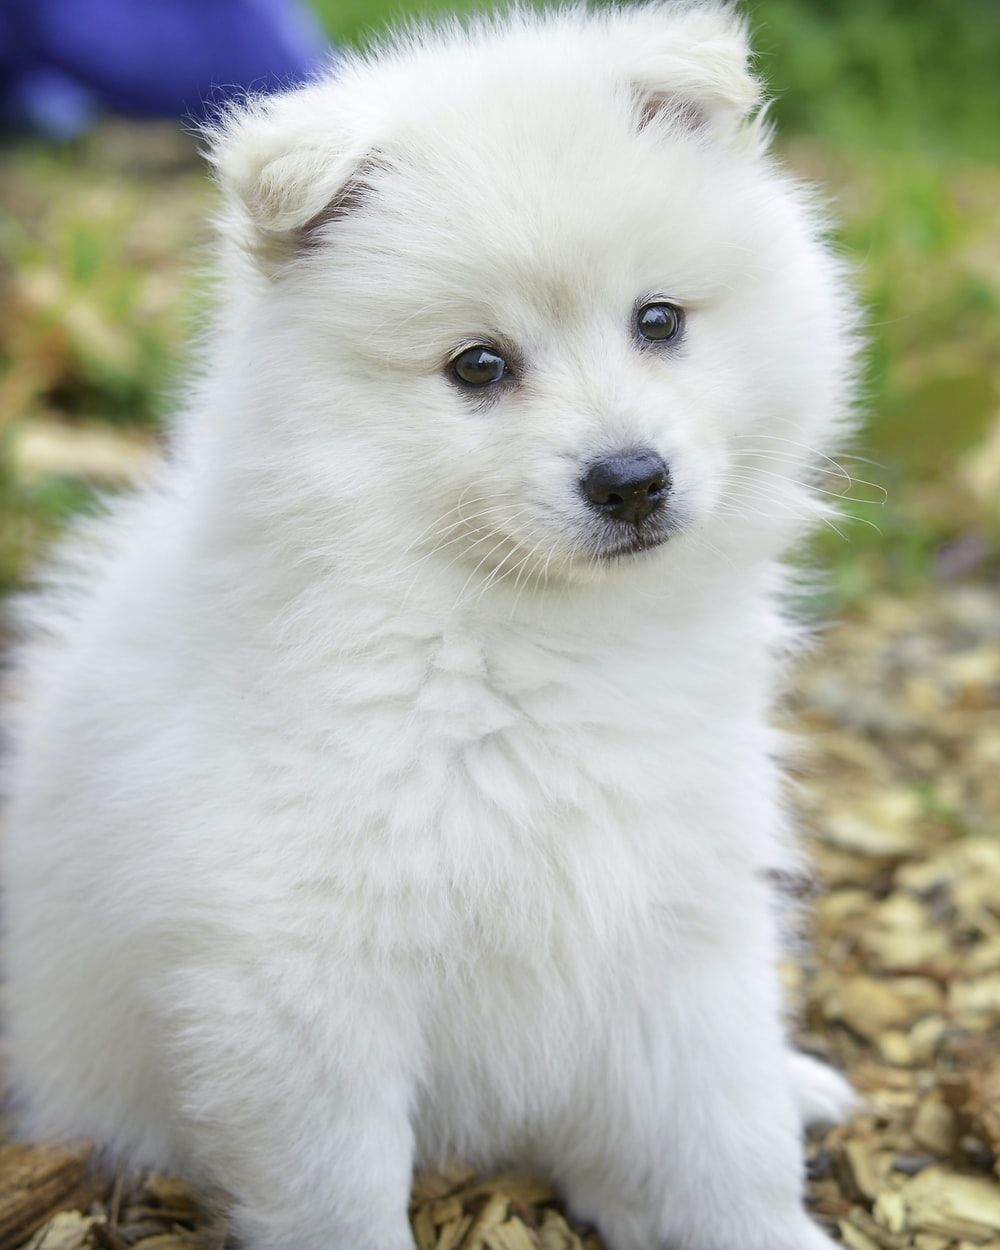 White Fluffy Dog Picture. Download Free Image